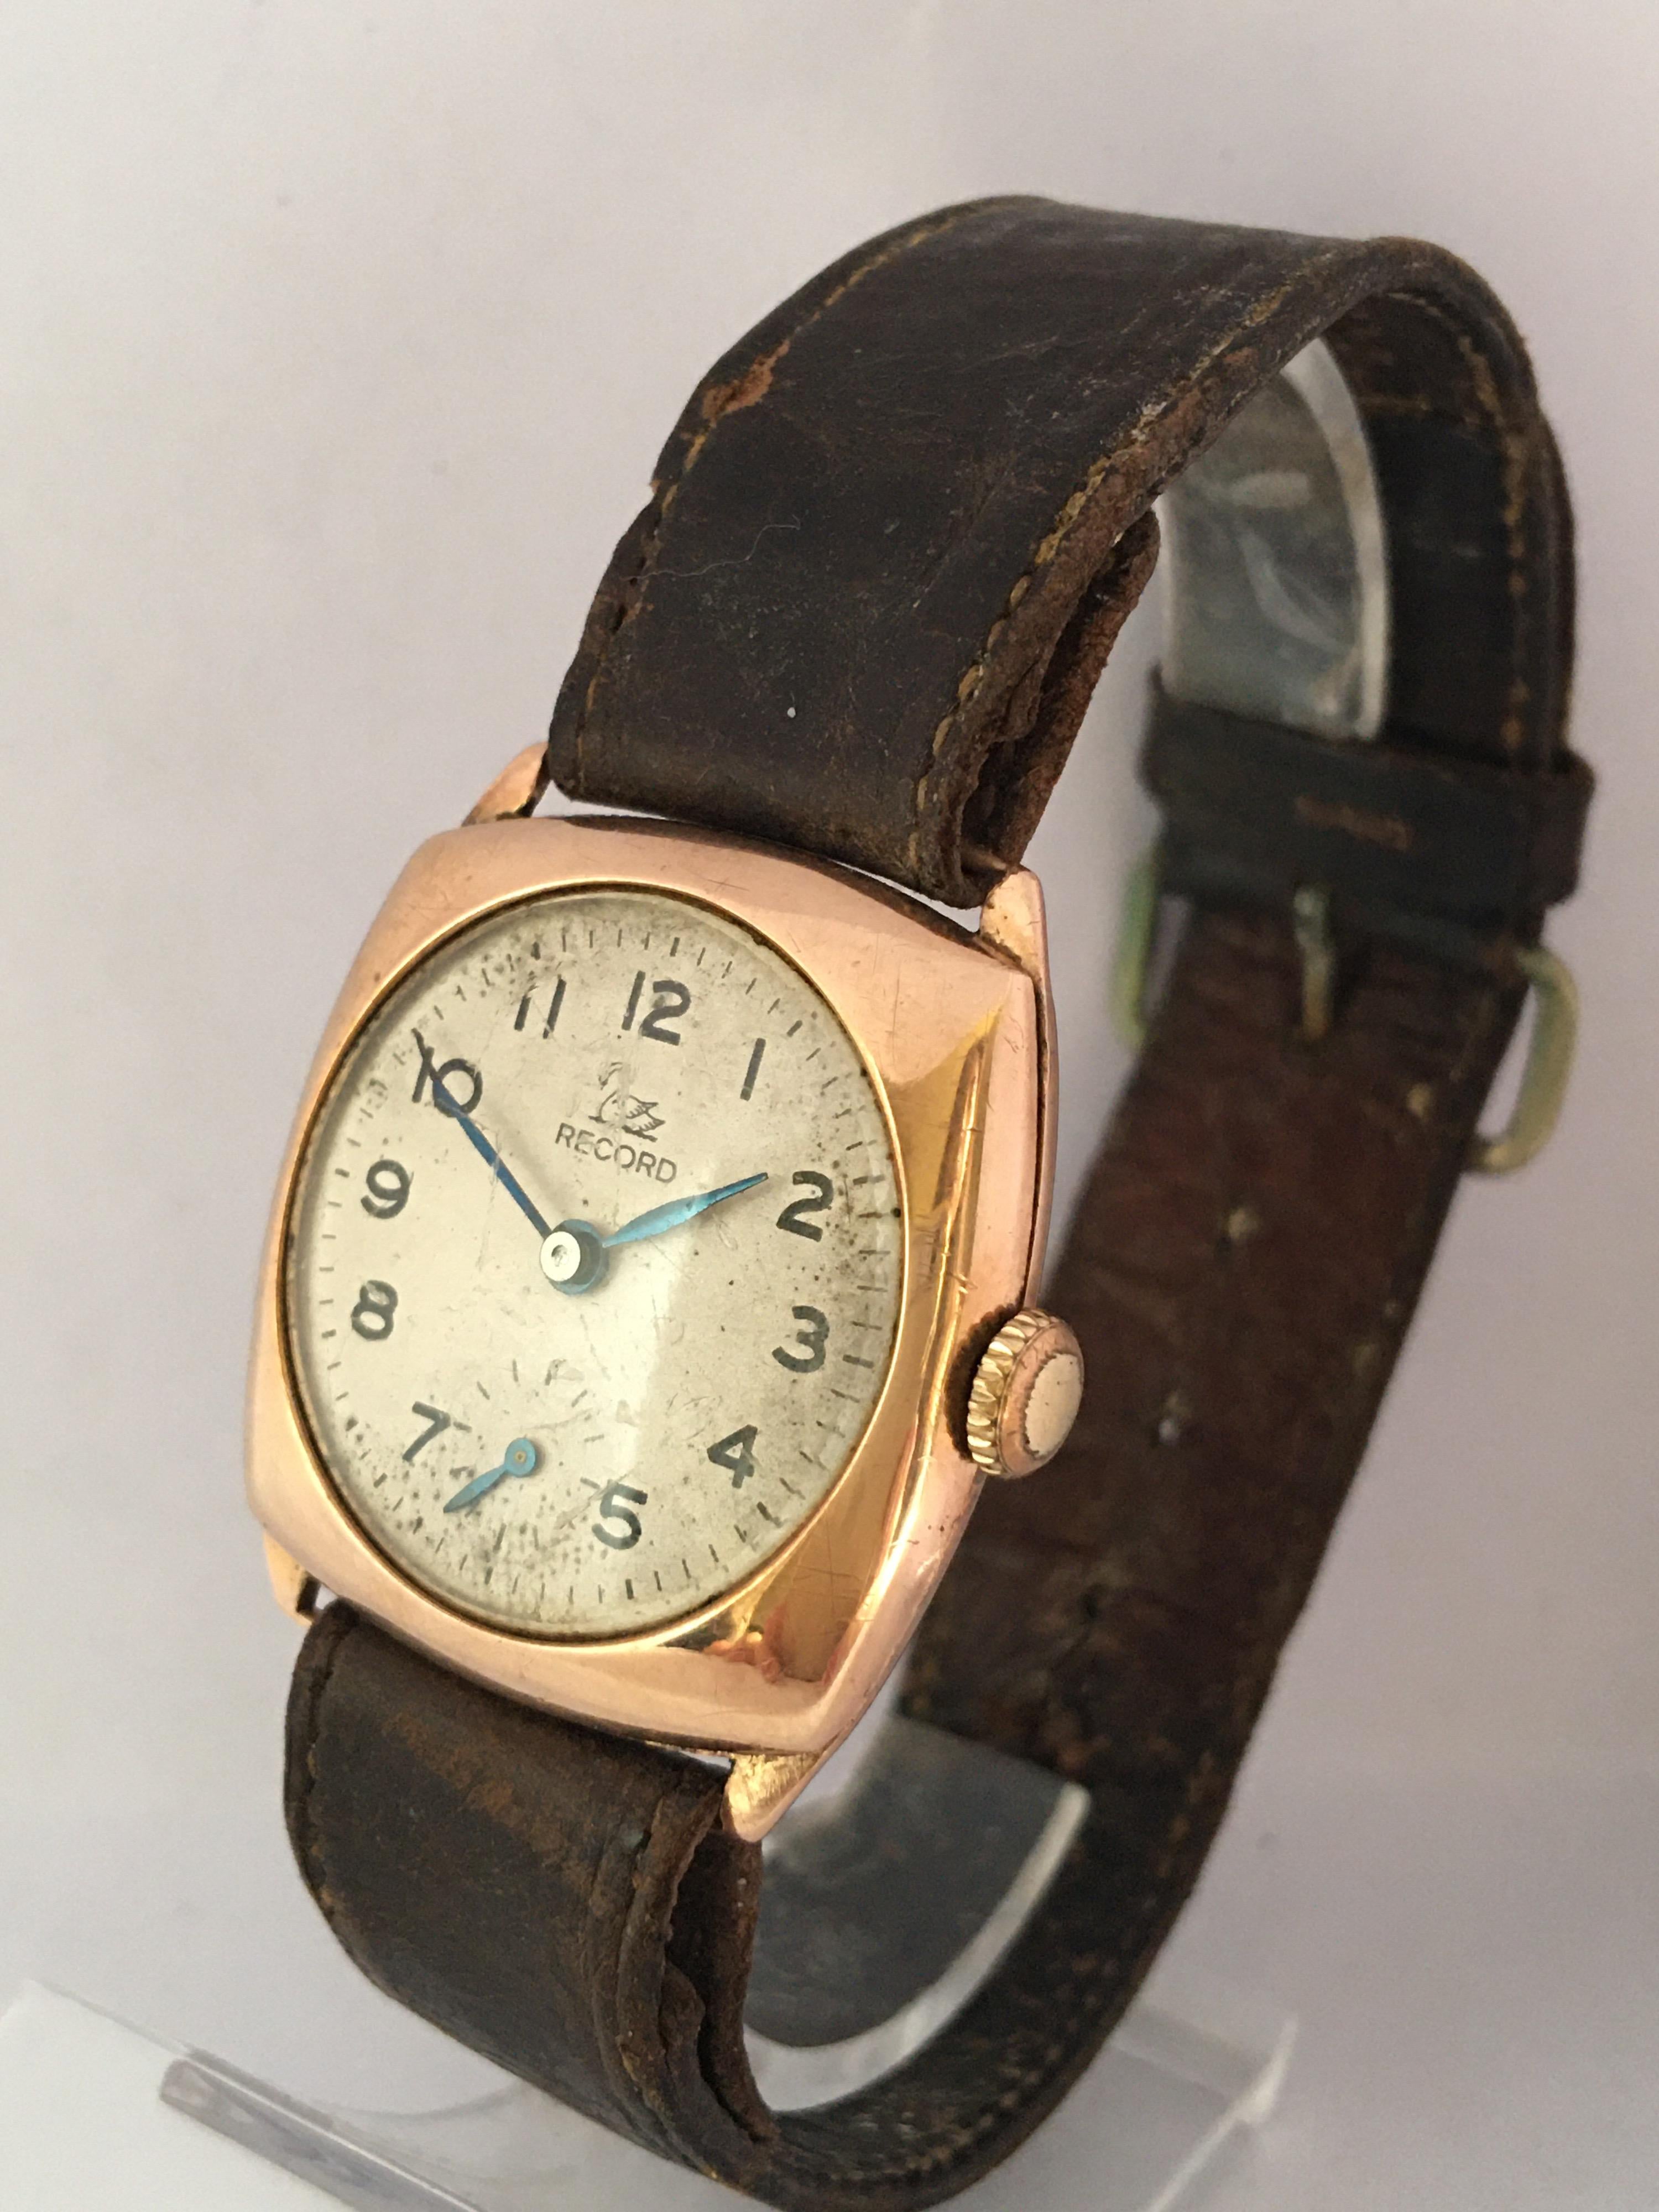 This beautiful pre-owned vintage hand winding gold wristwatch is in good working condition and it is running well. Visible signs of ageing and wear with light marks on the glass surface and on the watch case as shown. The silvered dial has aged. The